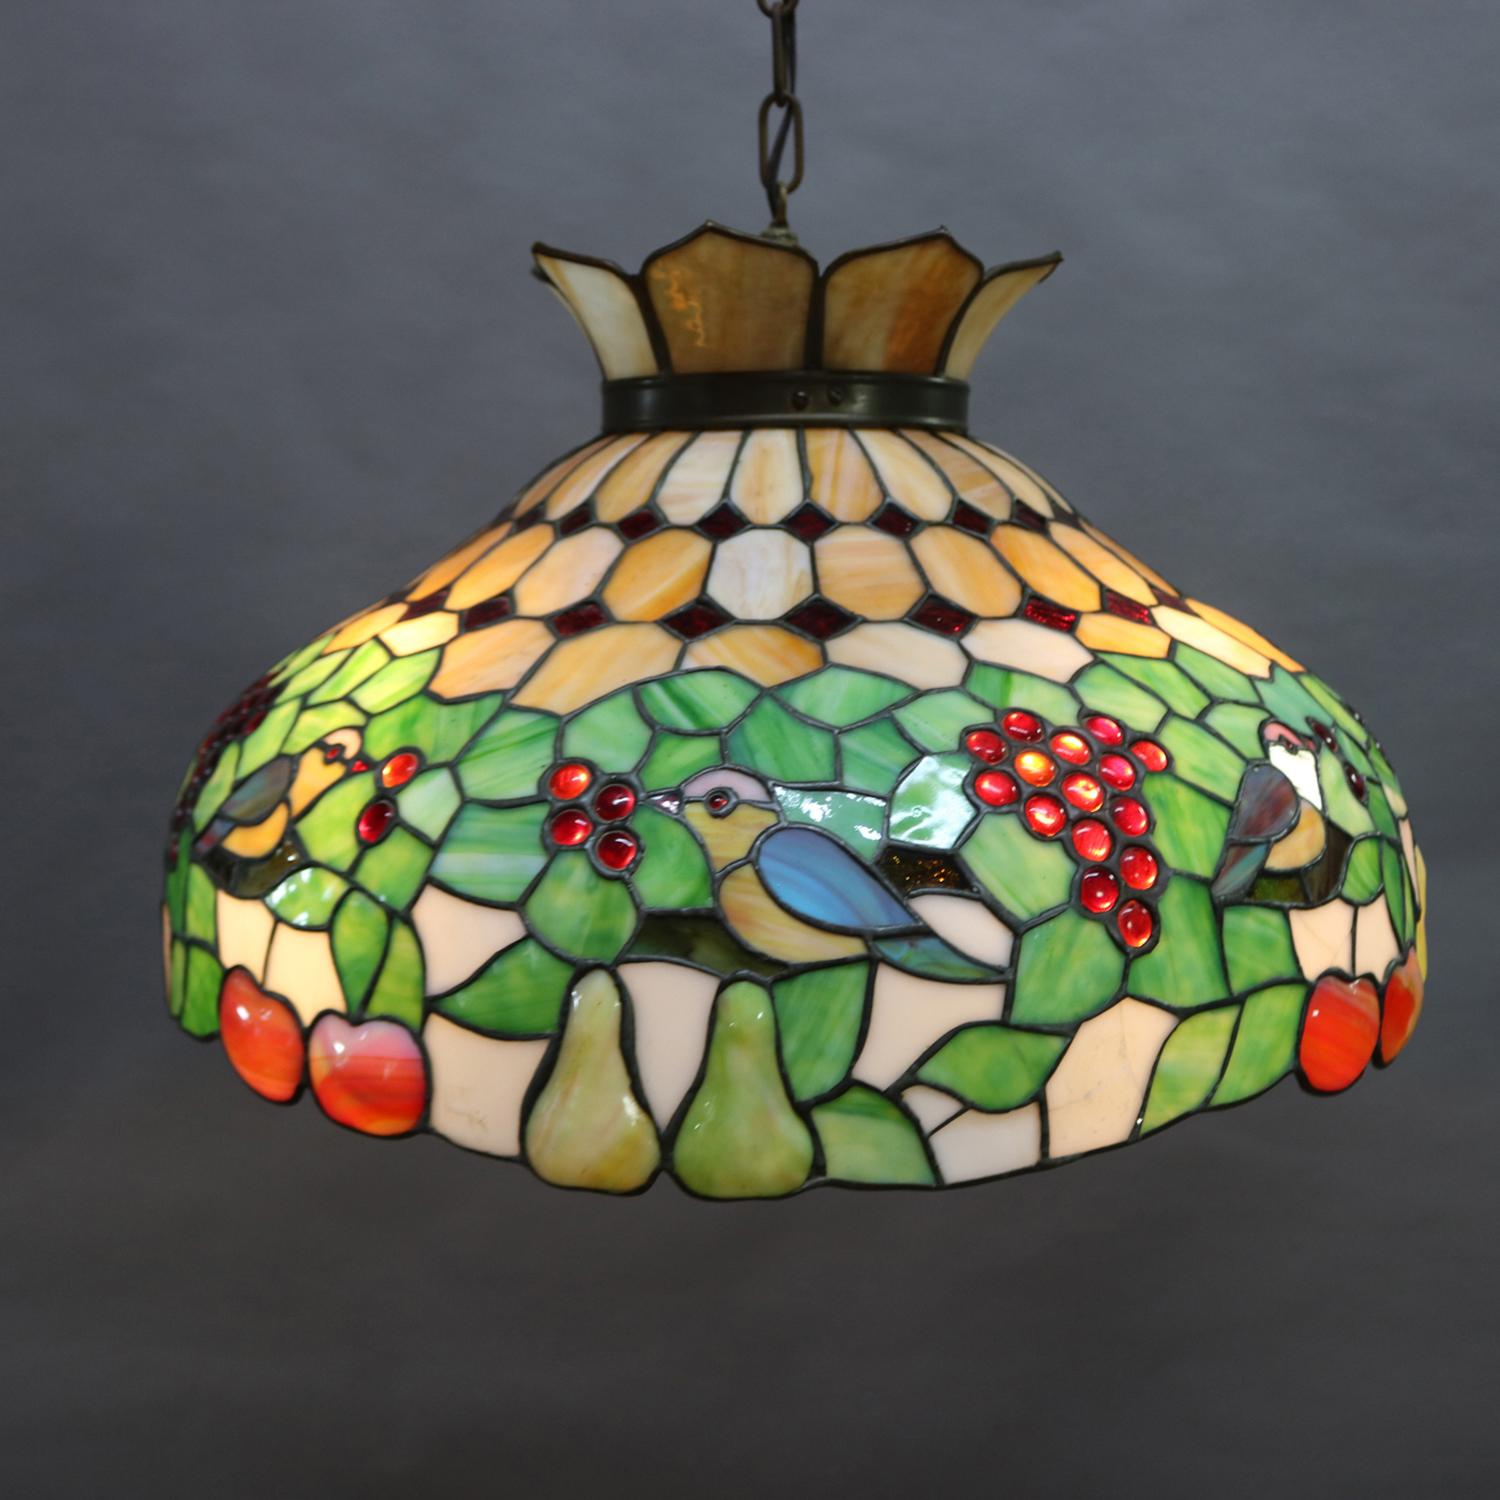 American Antique Arts & Crafts Mosaic Slag Glass Dome Chandelier, Grapes and Birds